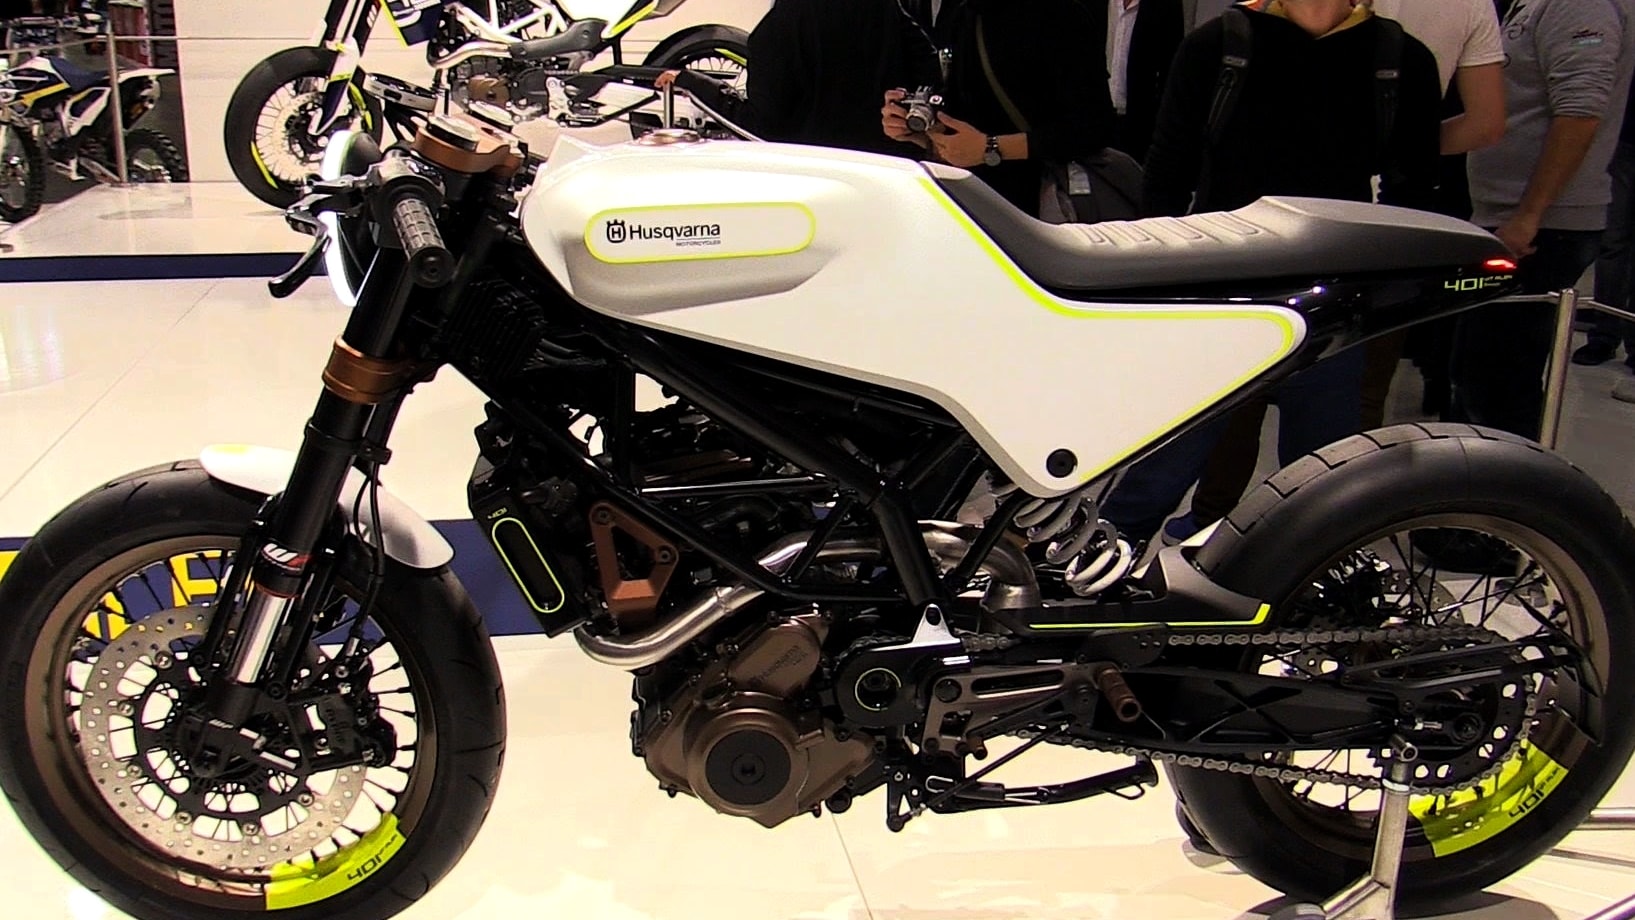 Ktm Husqvarna In India Will Be Launched In 2020